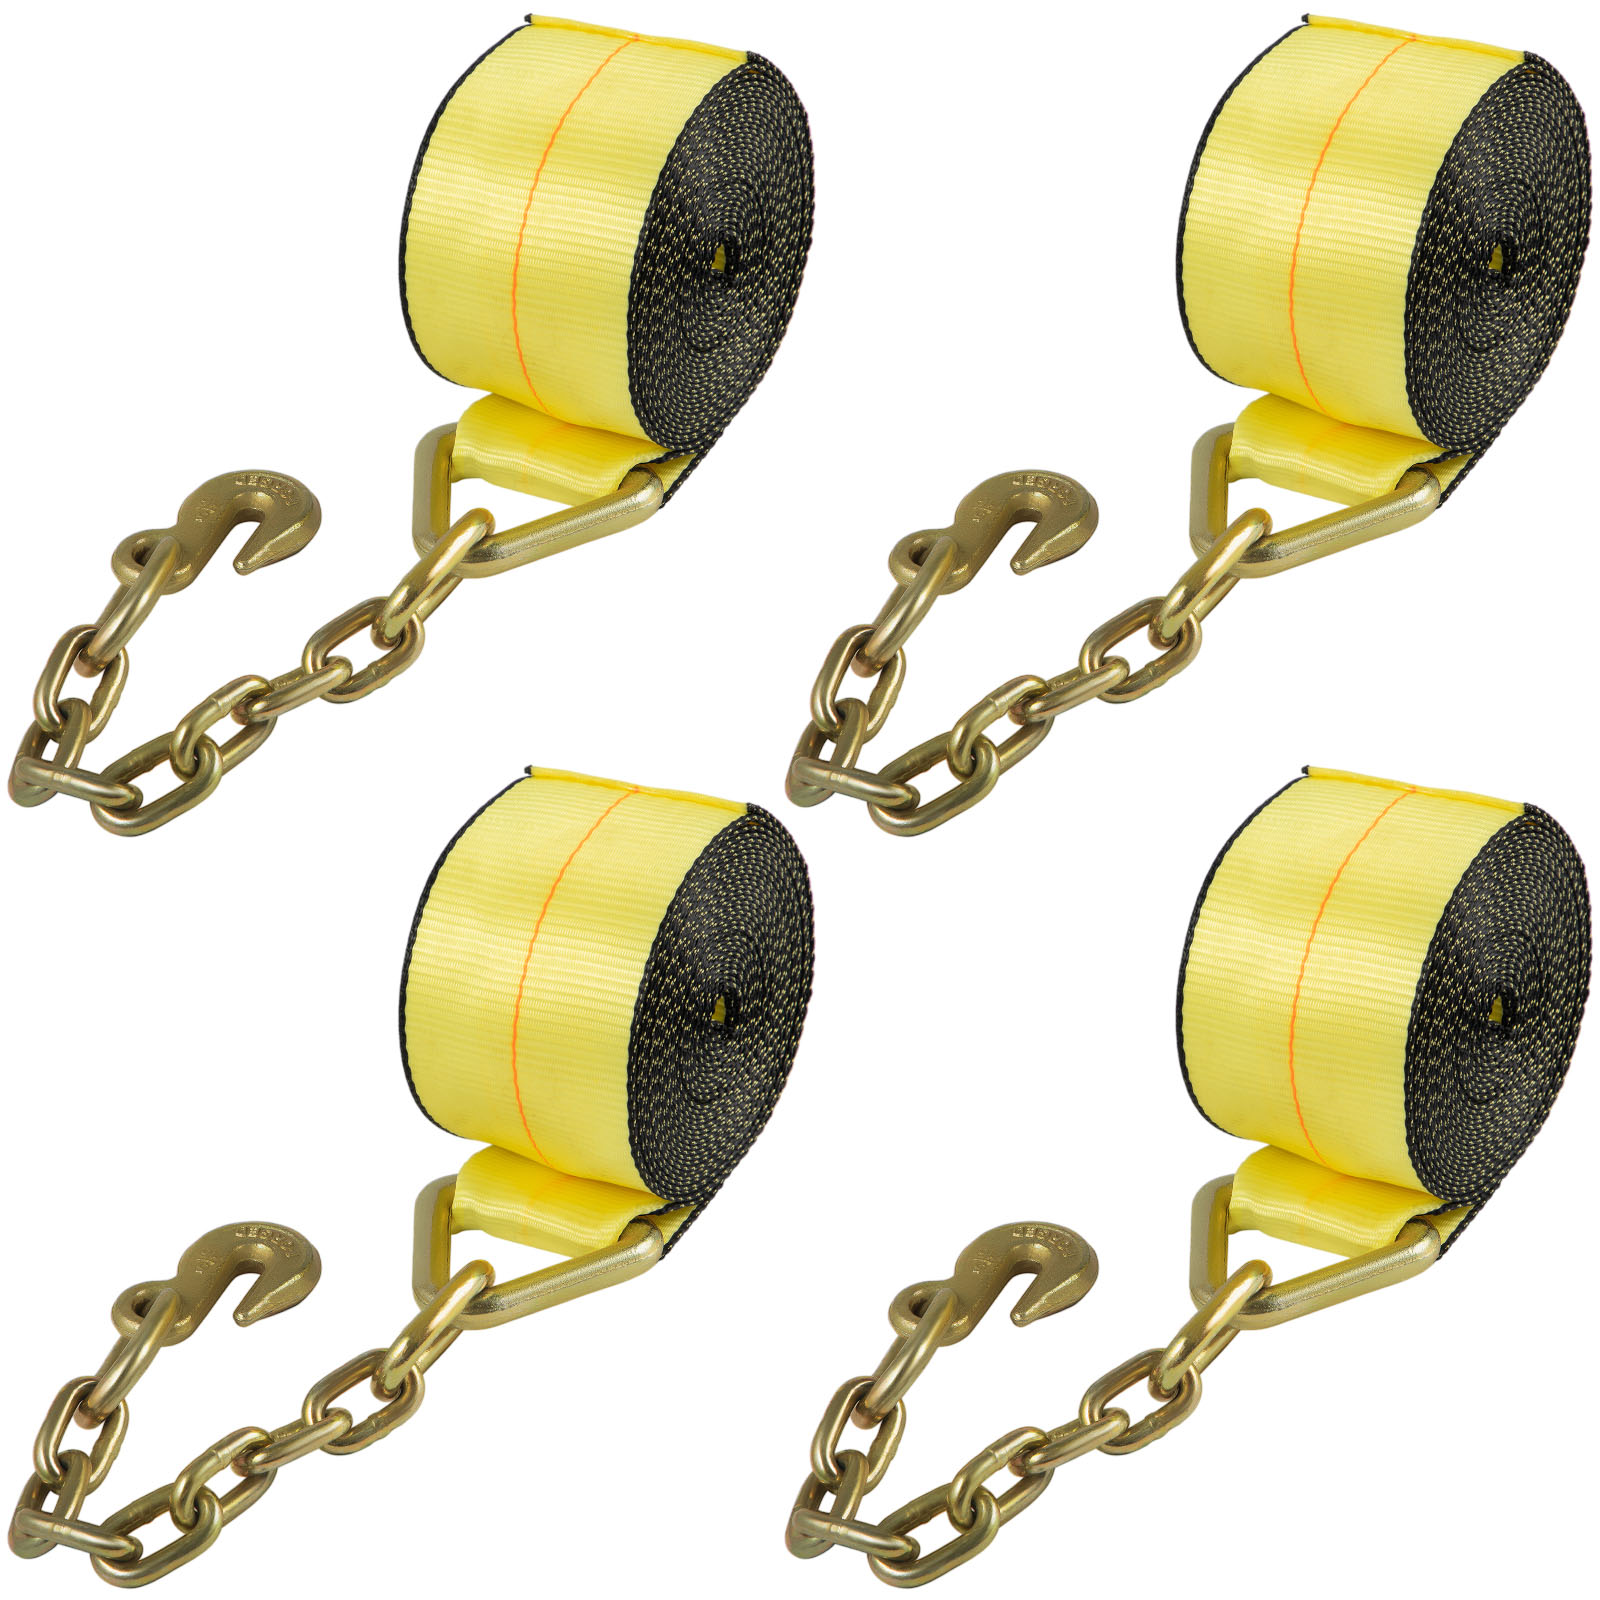 Vevor 4 Pack 4"x30' Winch Tie Down Strap W/chain Extension For Flatbed Truck от Vevor Many GEOs